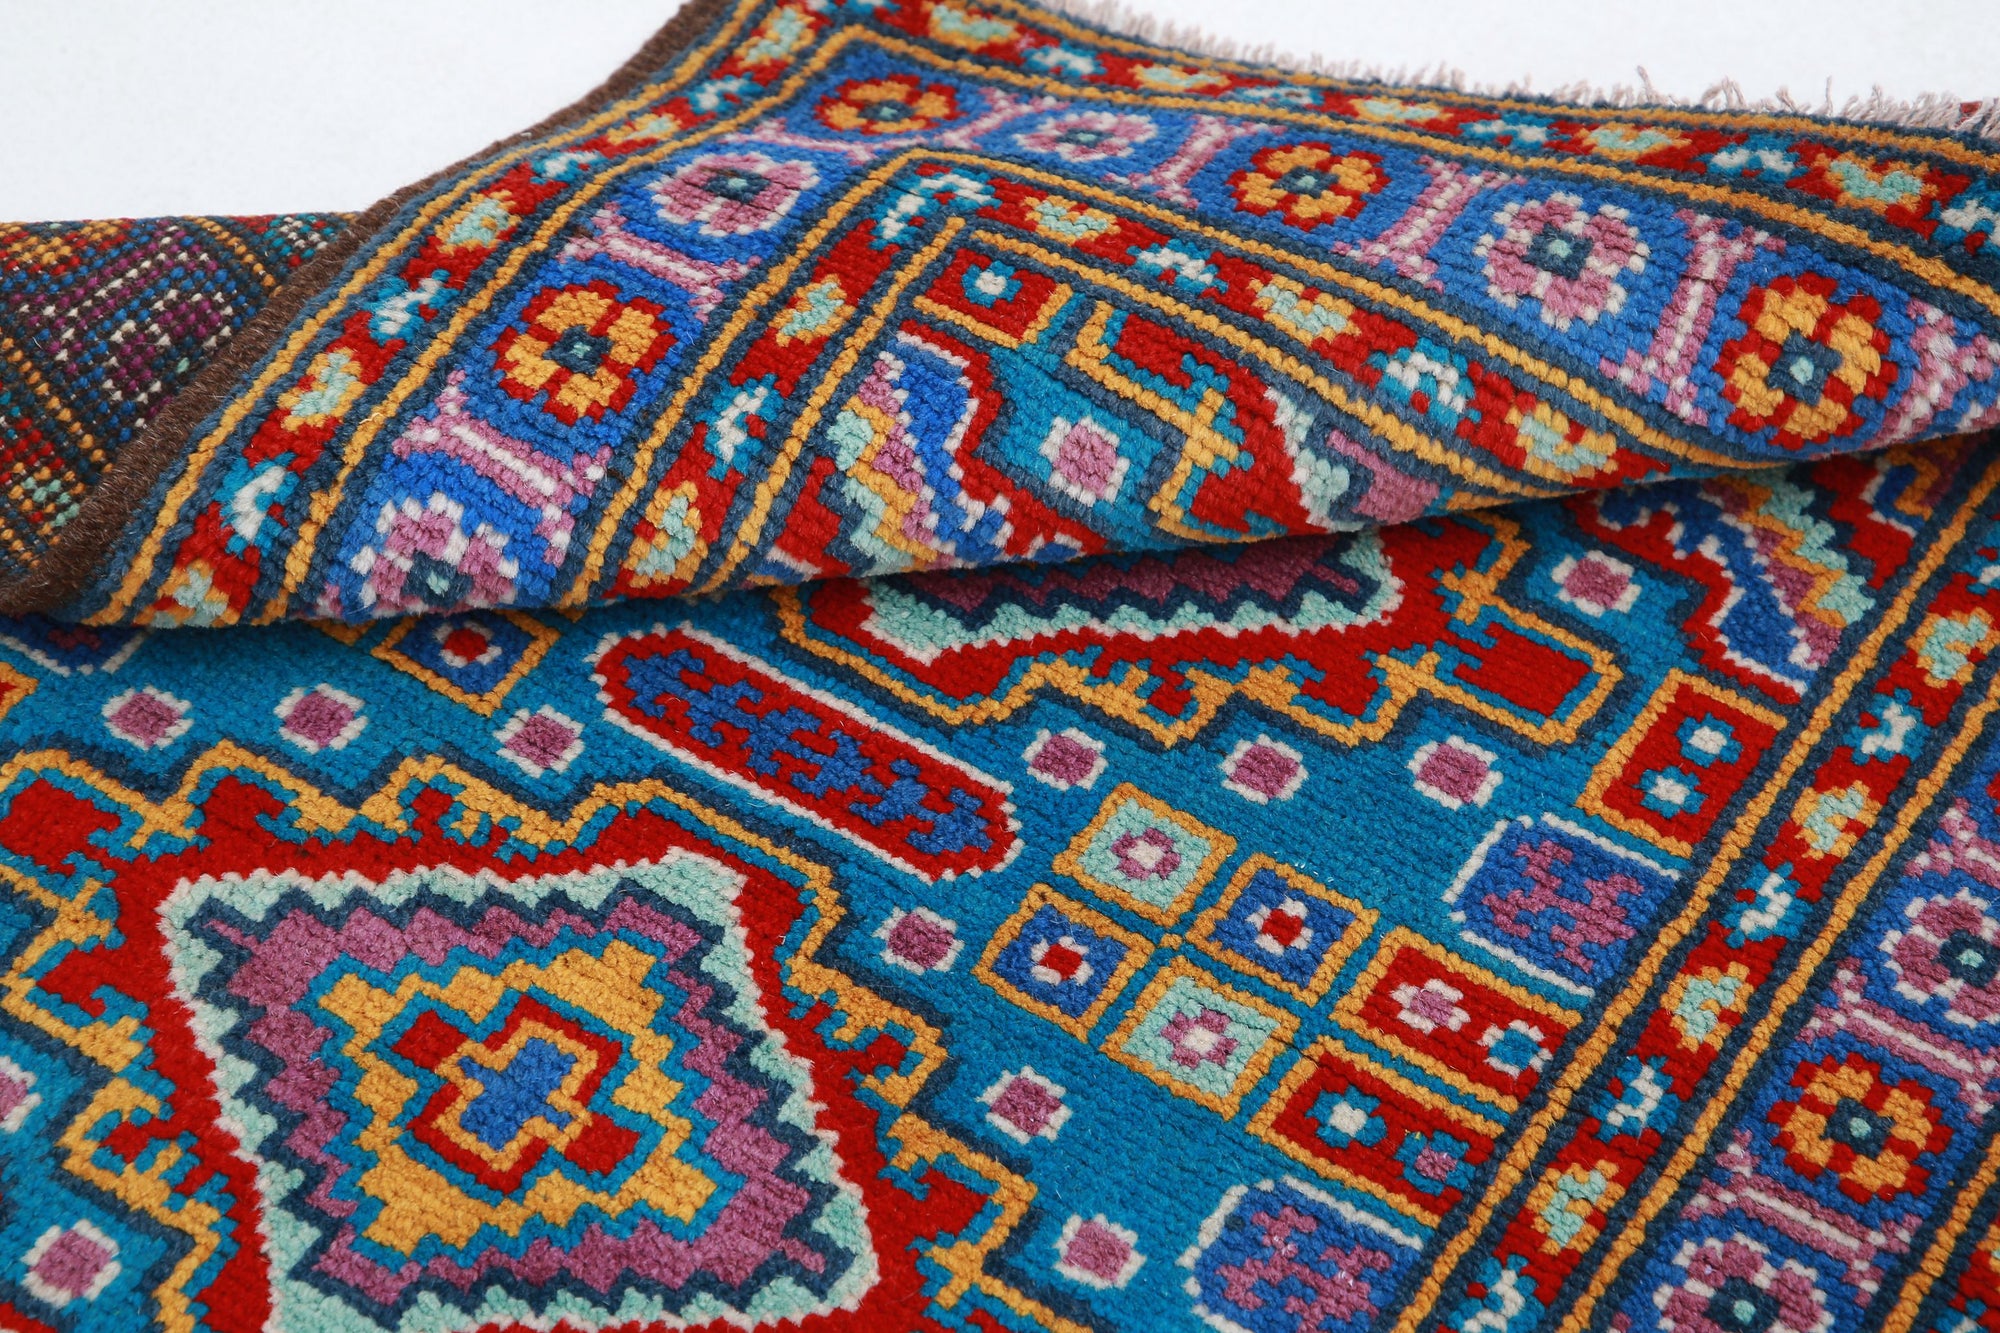 Revival-hand-knotted-qarghani-wool-rug-5014010-5.jpg